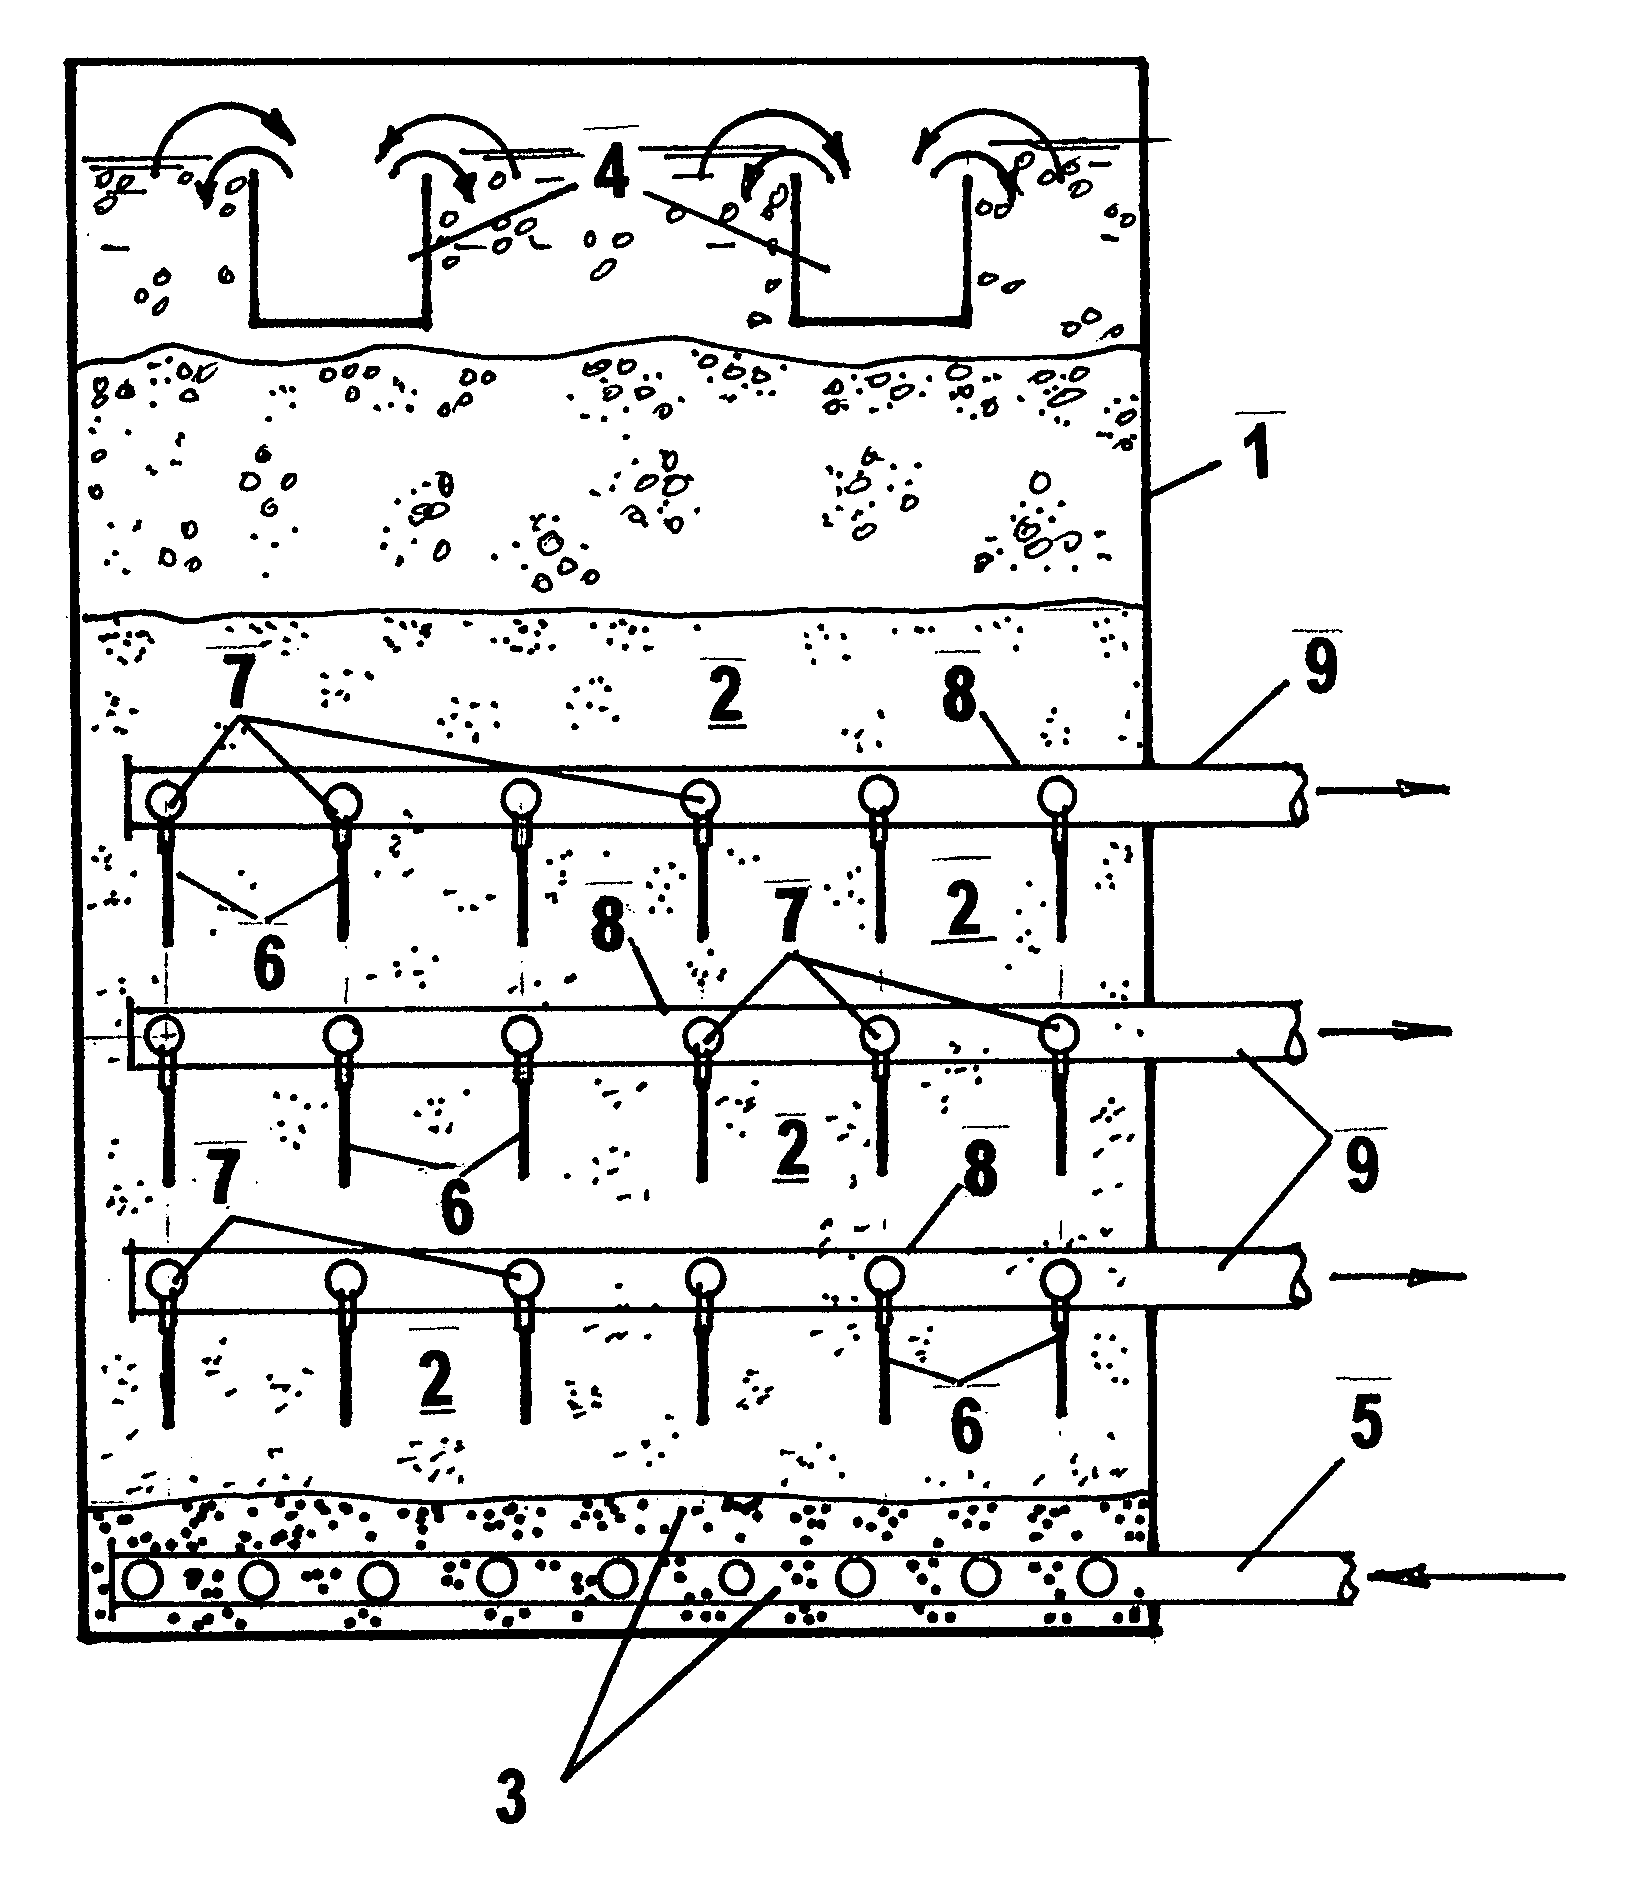 Method for water filtration